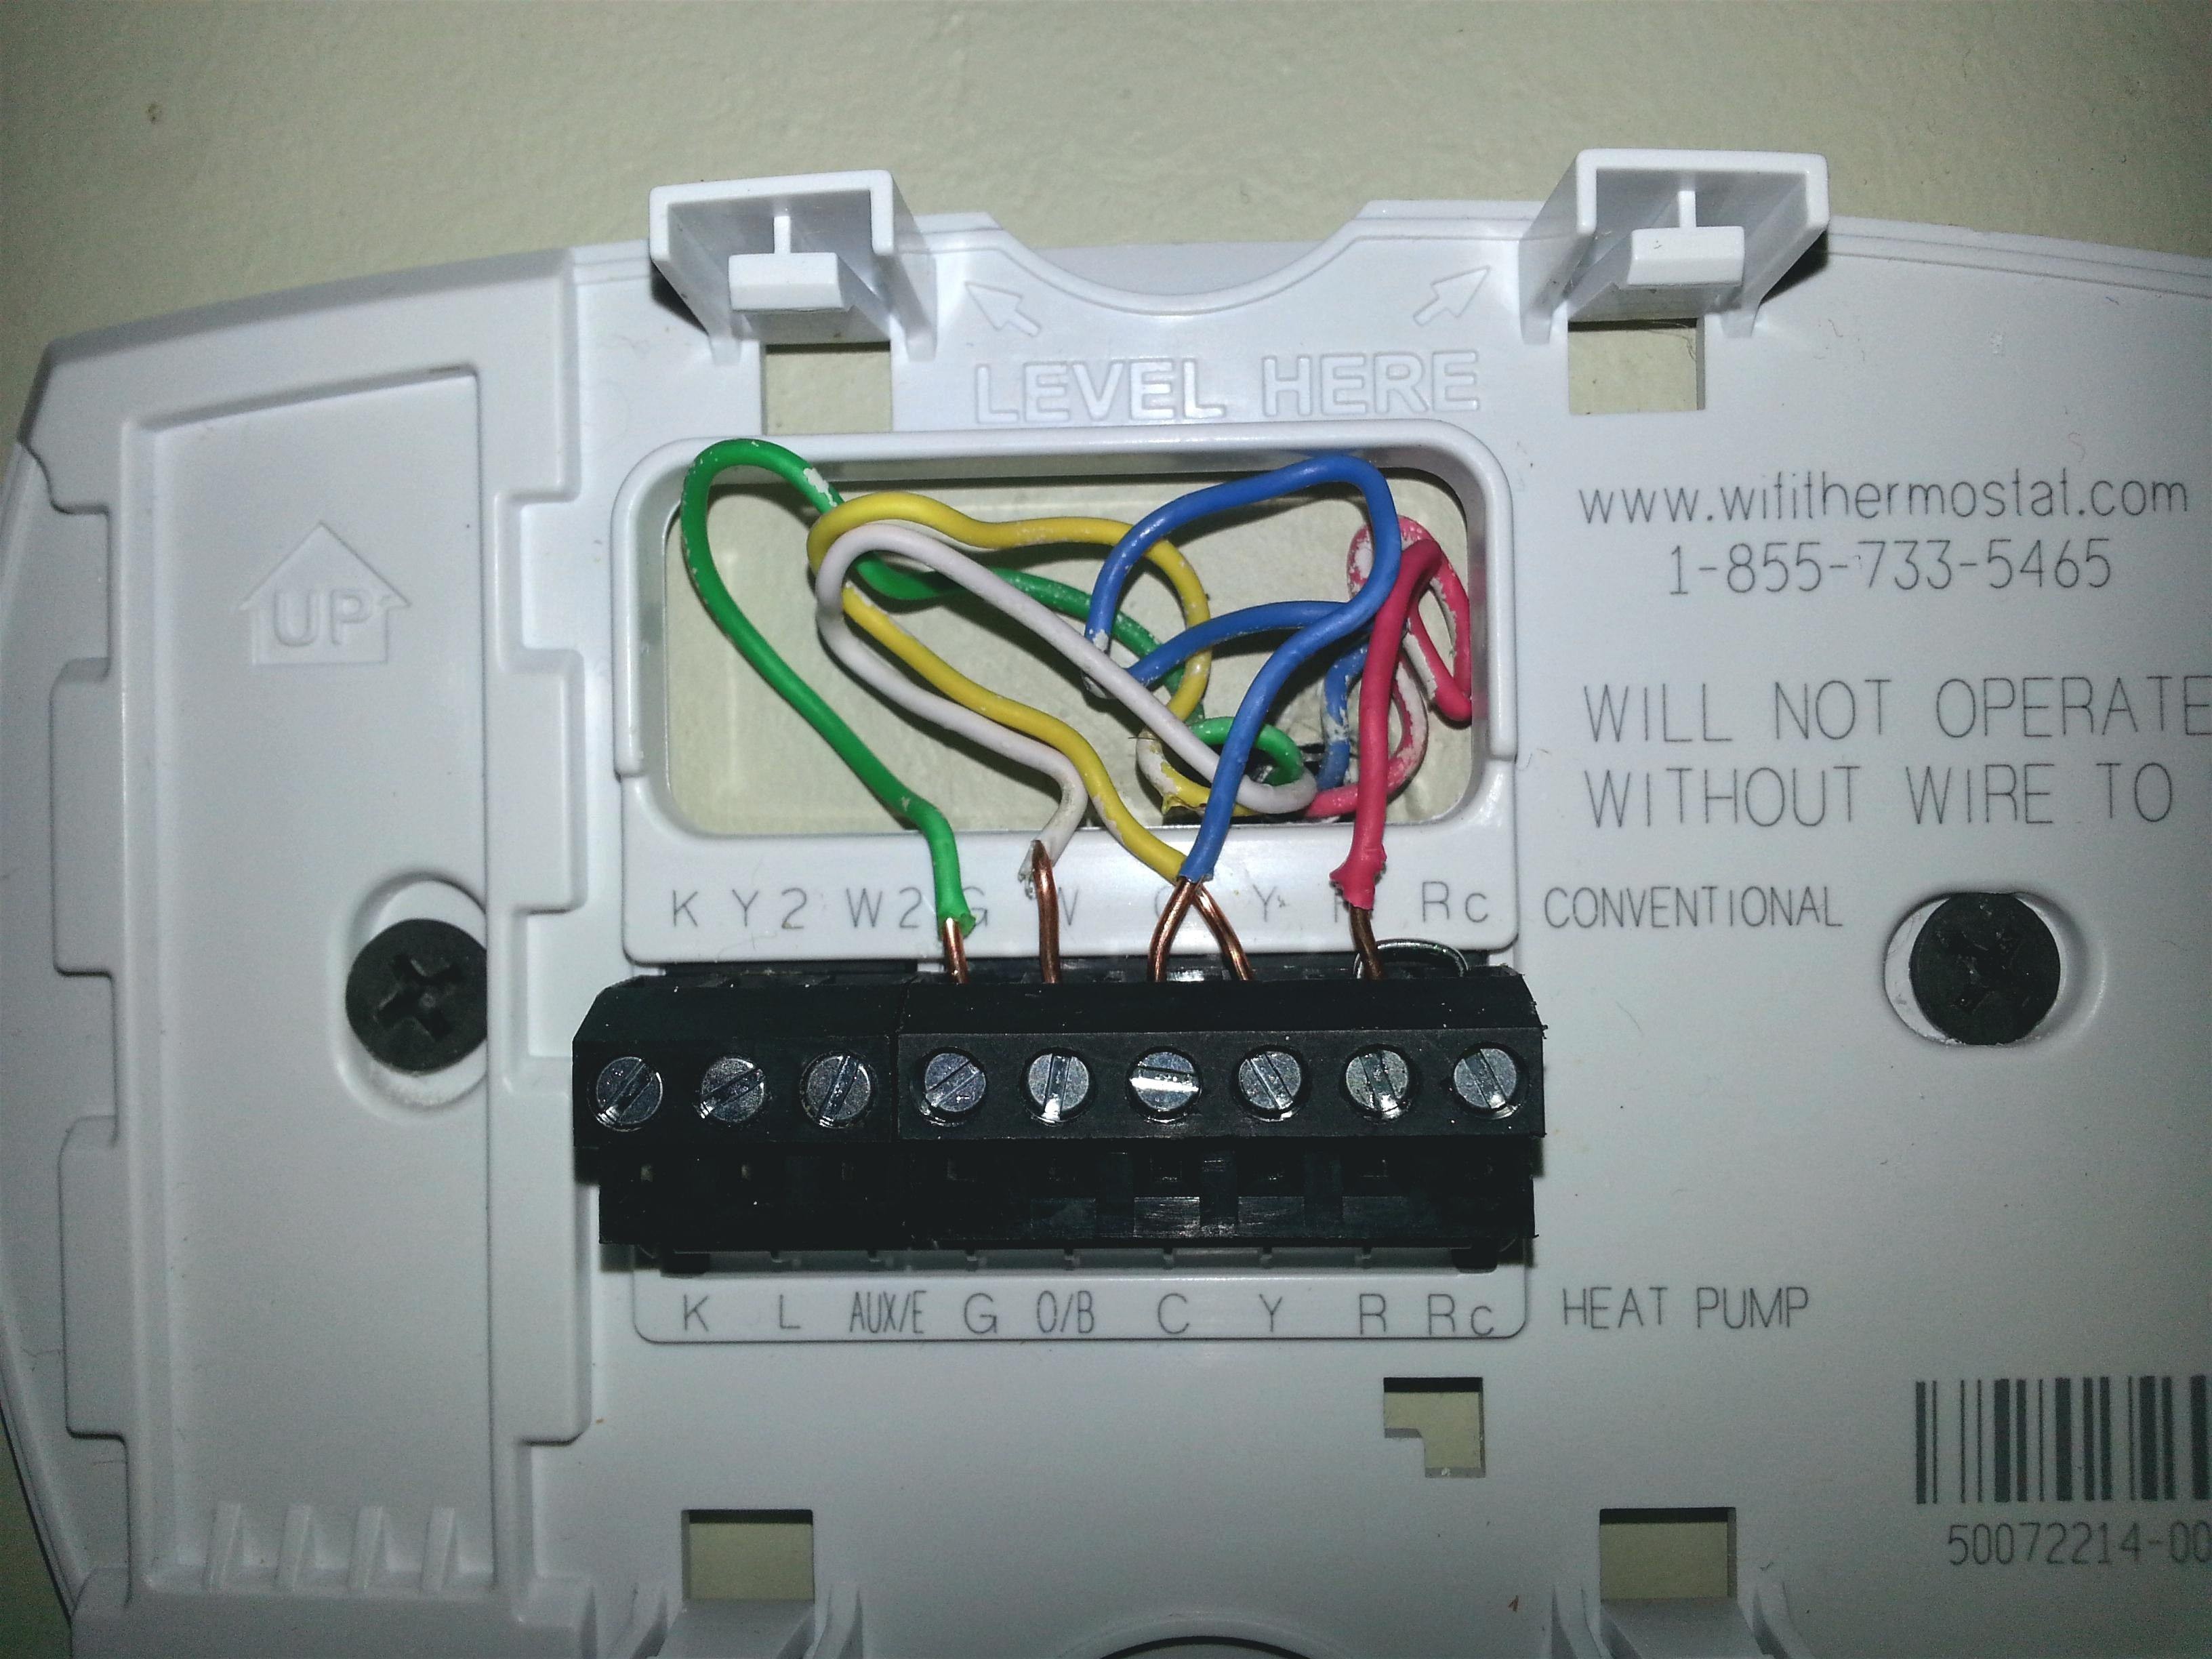 Wiring Diagram for Honeywell thermostat Rth3100c Fresh Honeywell thermostat Wiring 3 Wire Heat Pump top Notch